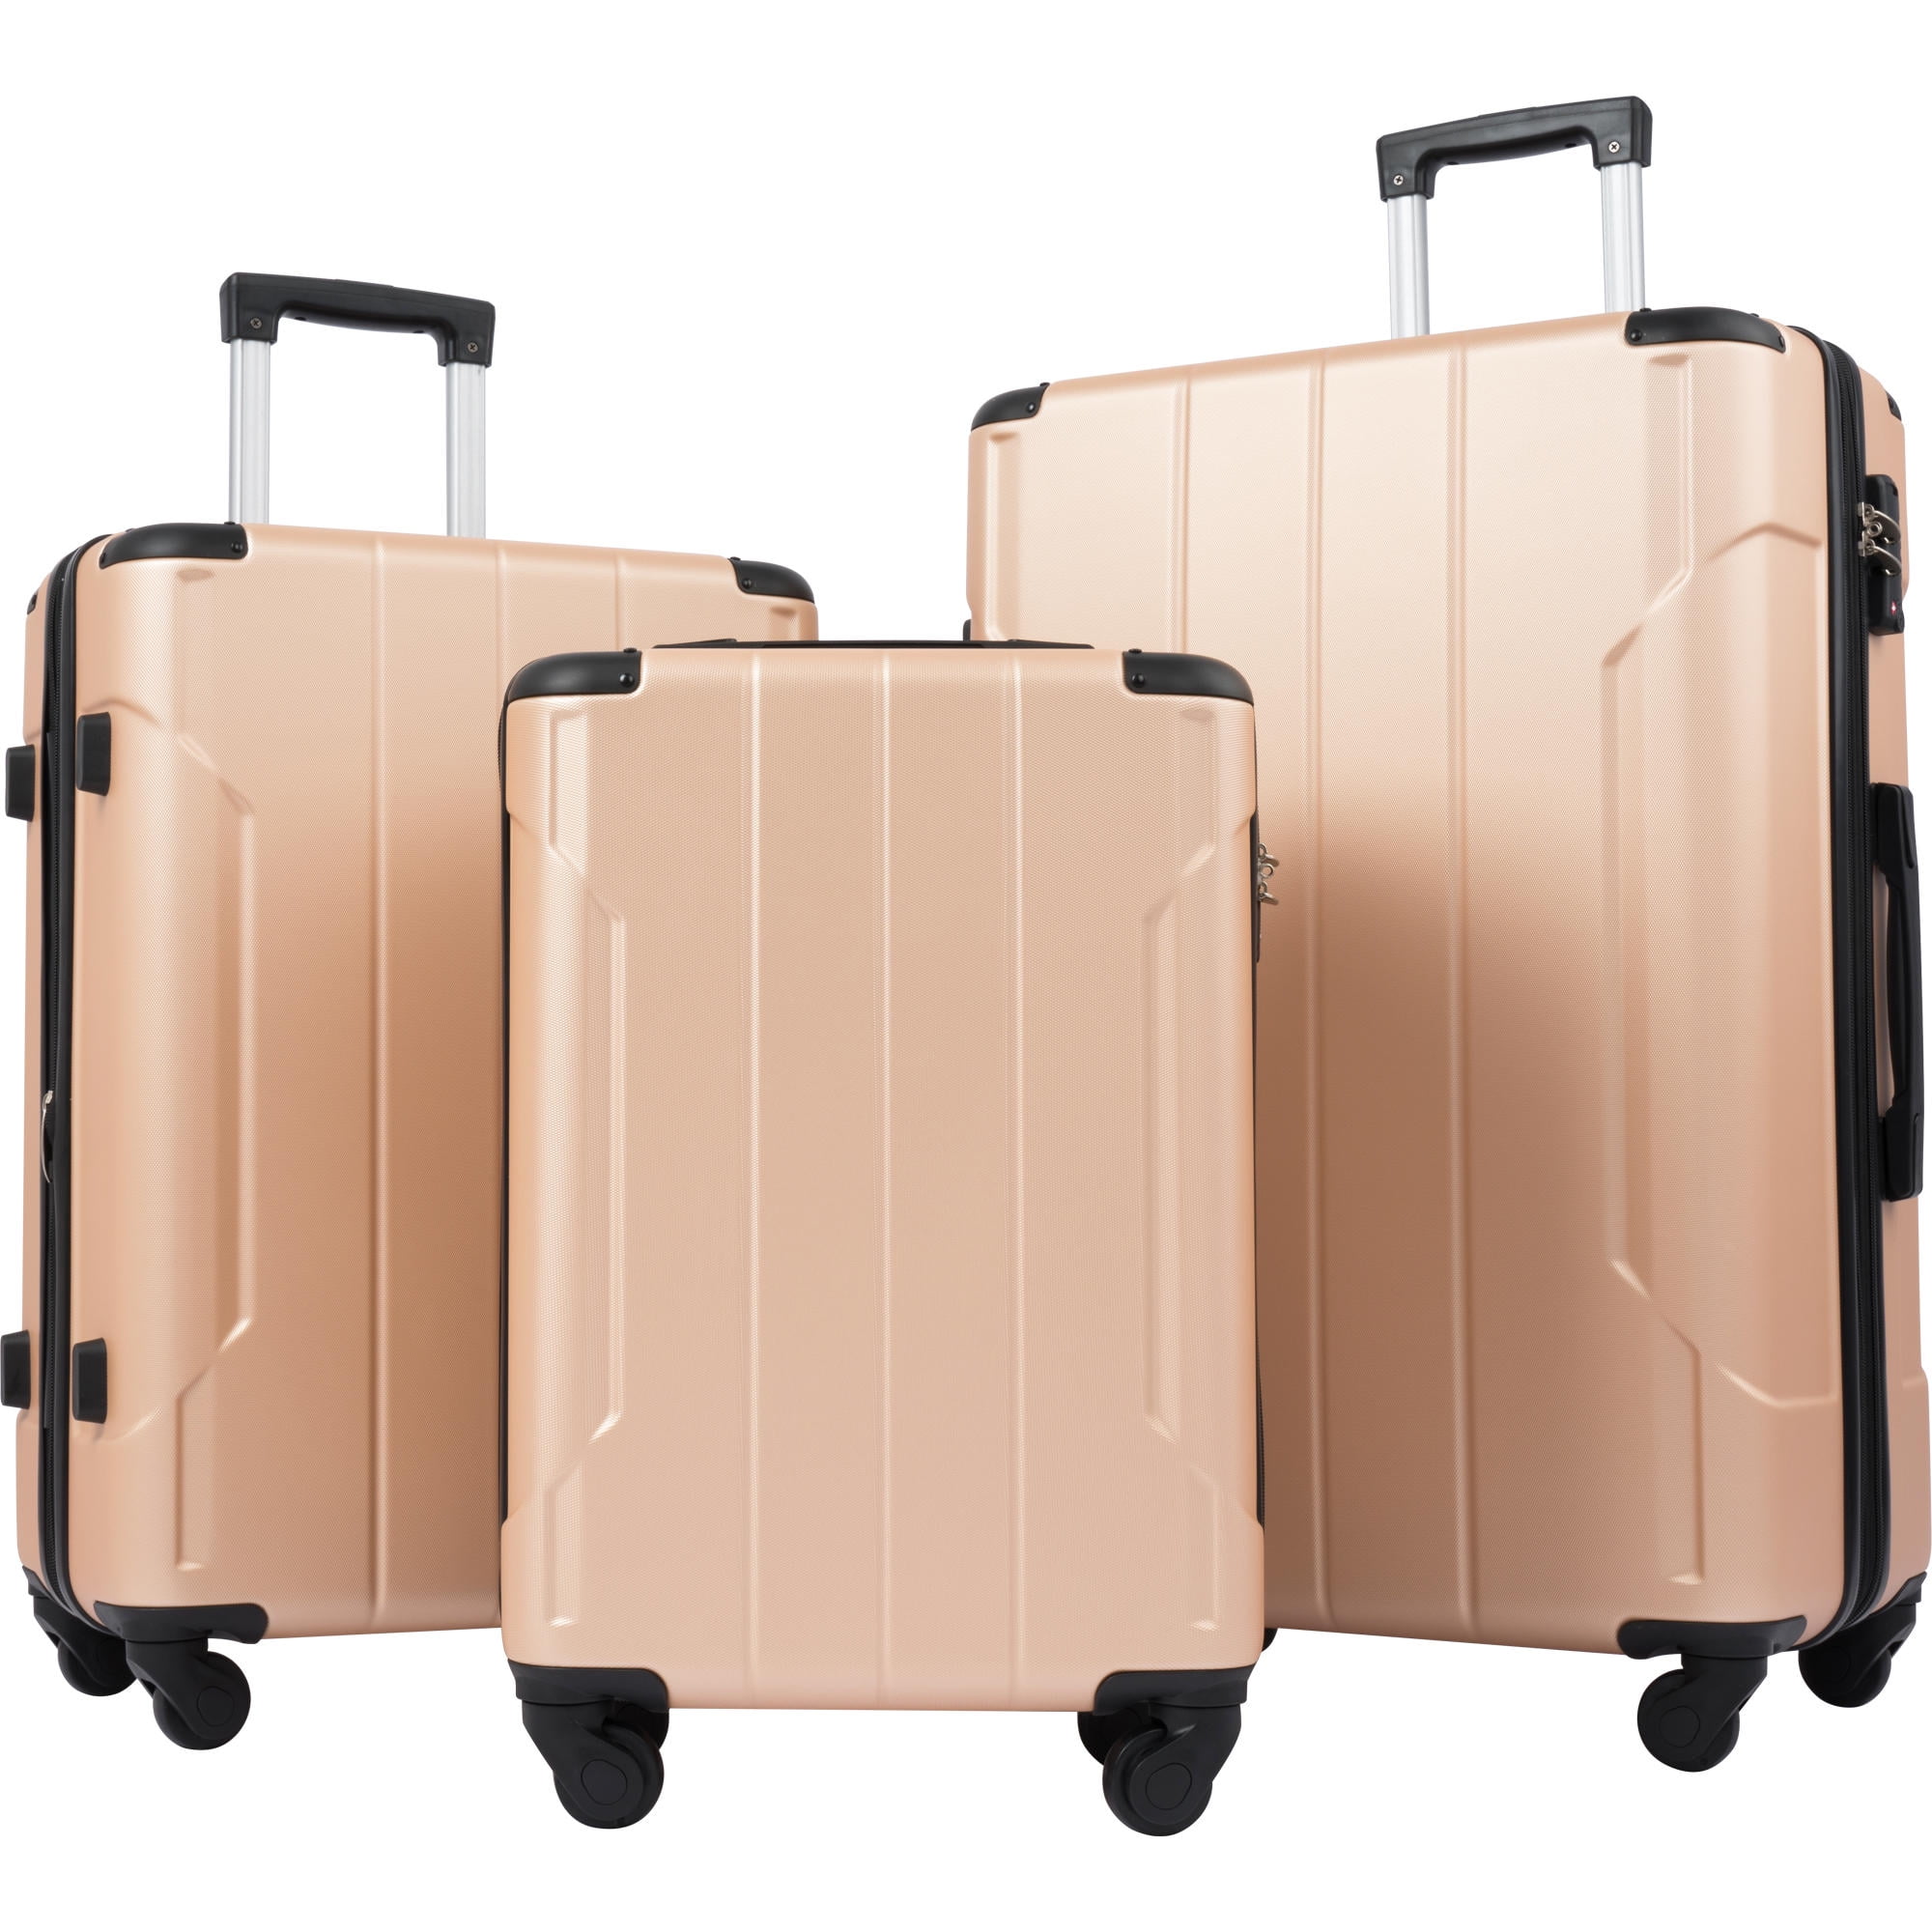 Dropship Luggage Set Of 3, 20-inch With USB Port, Airline Certified  Carry-on Luggage With Cup Holder, ABS Hard Shell Luggage With Spinner  Wheels, Beige And Brown to Sell Online at a Lower